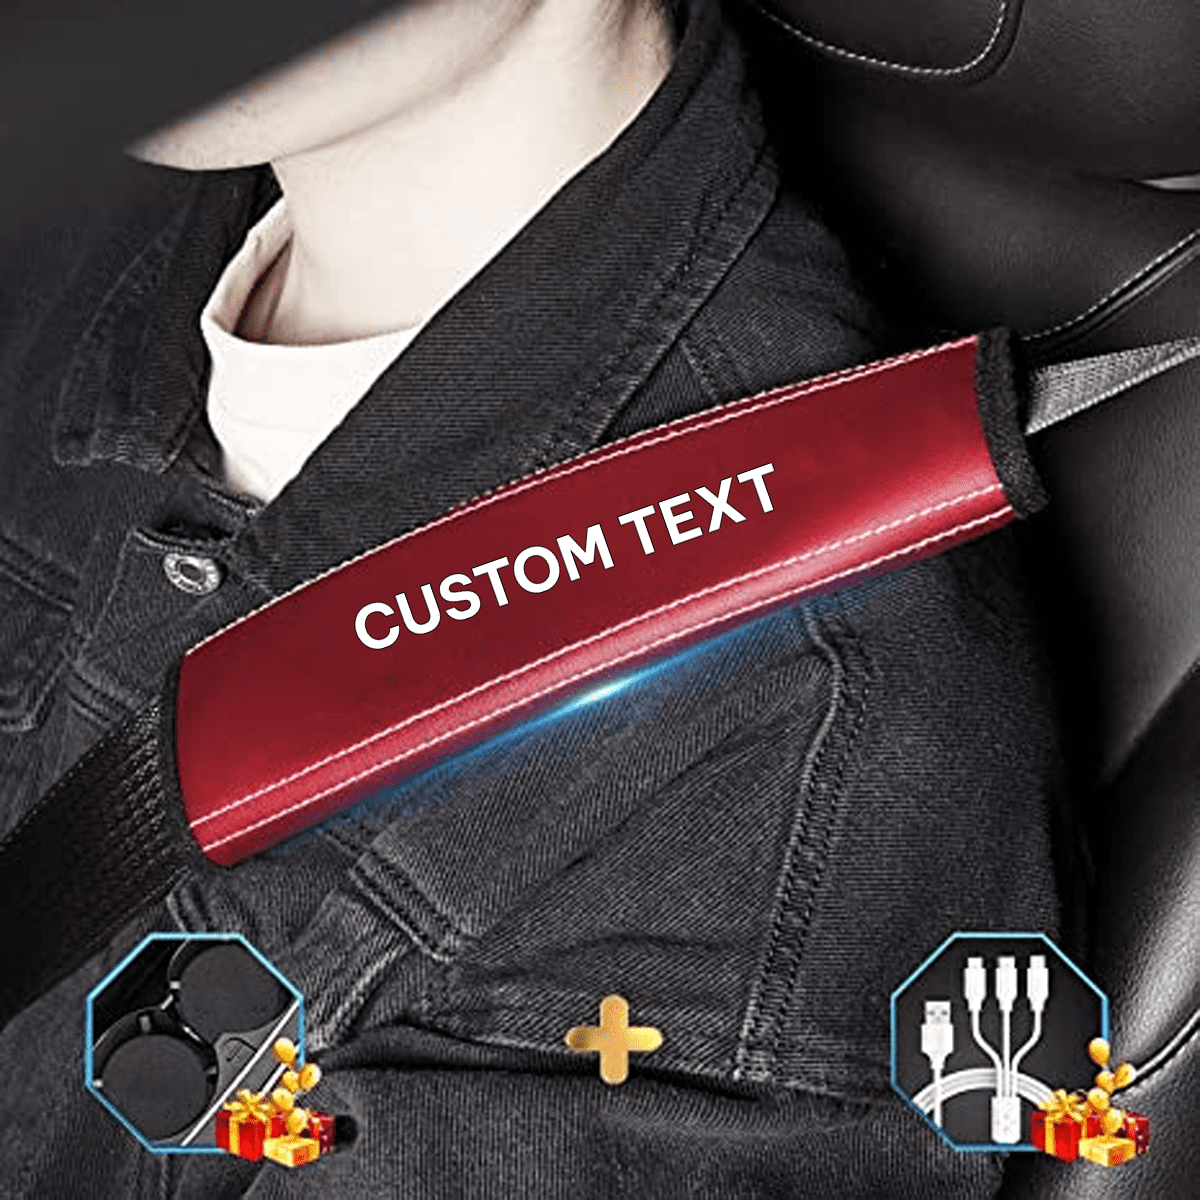 Custom Text and Logo Seat Belt Covers, Fit with Fiat, Microfiber Leather Seat Belt Shoulder Pads for More Comfortable Driving, Set of 2pcs